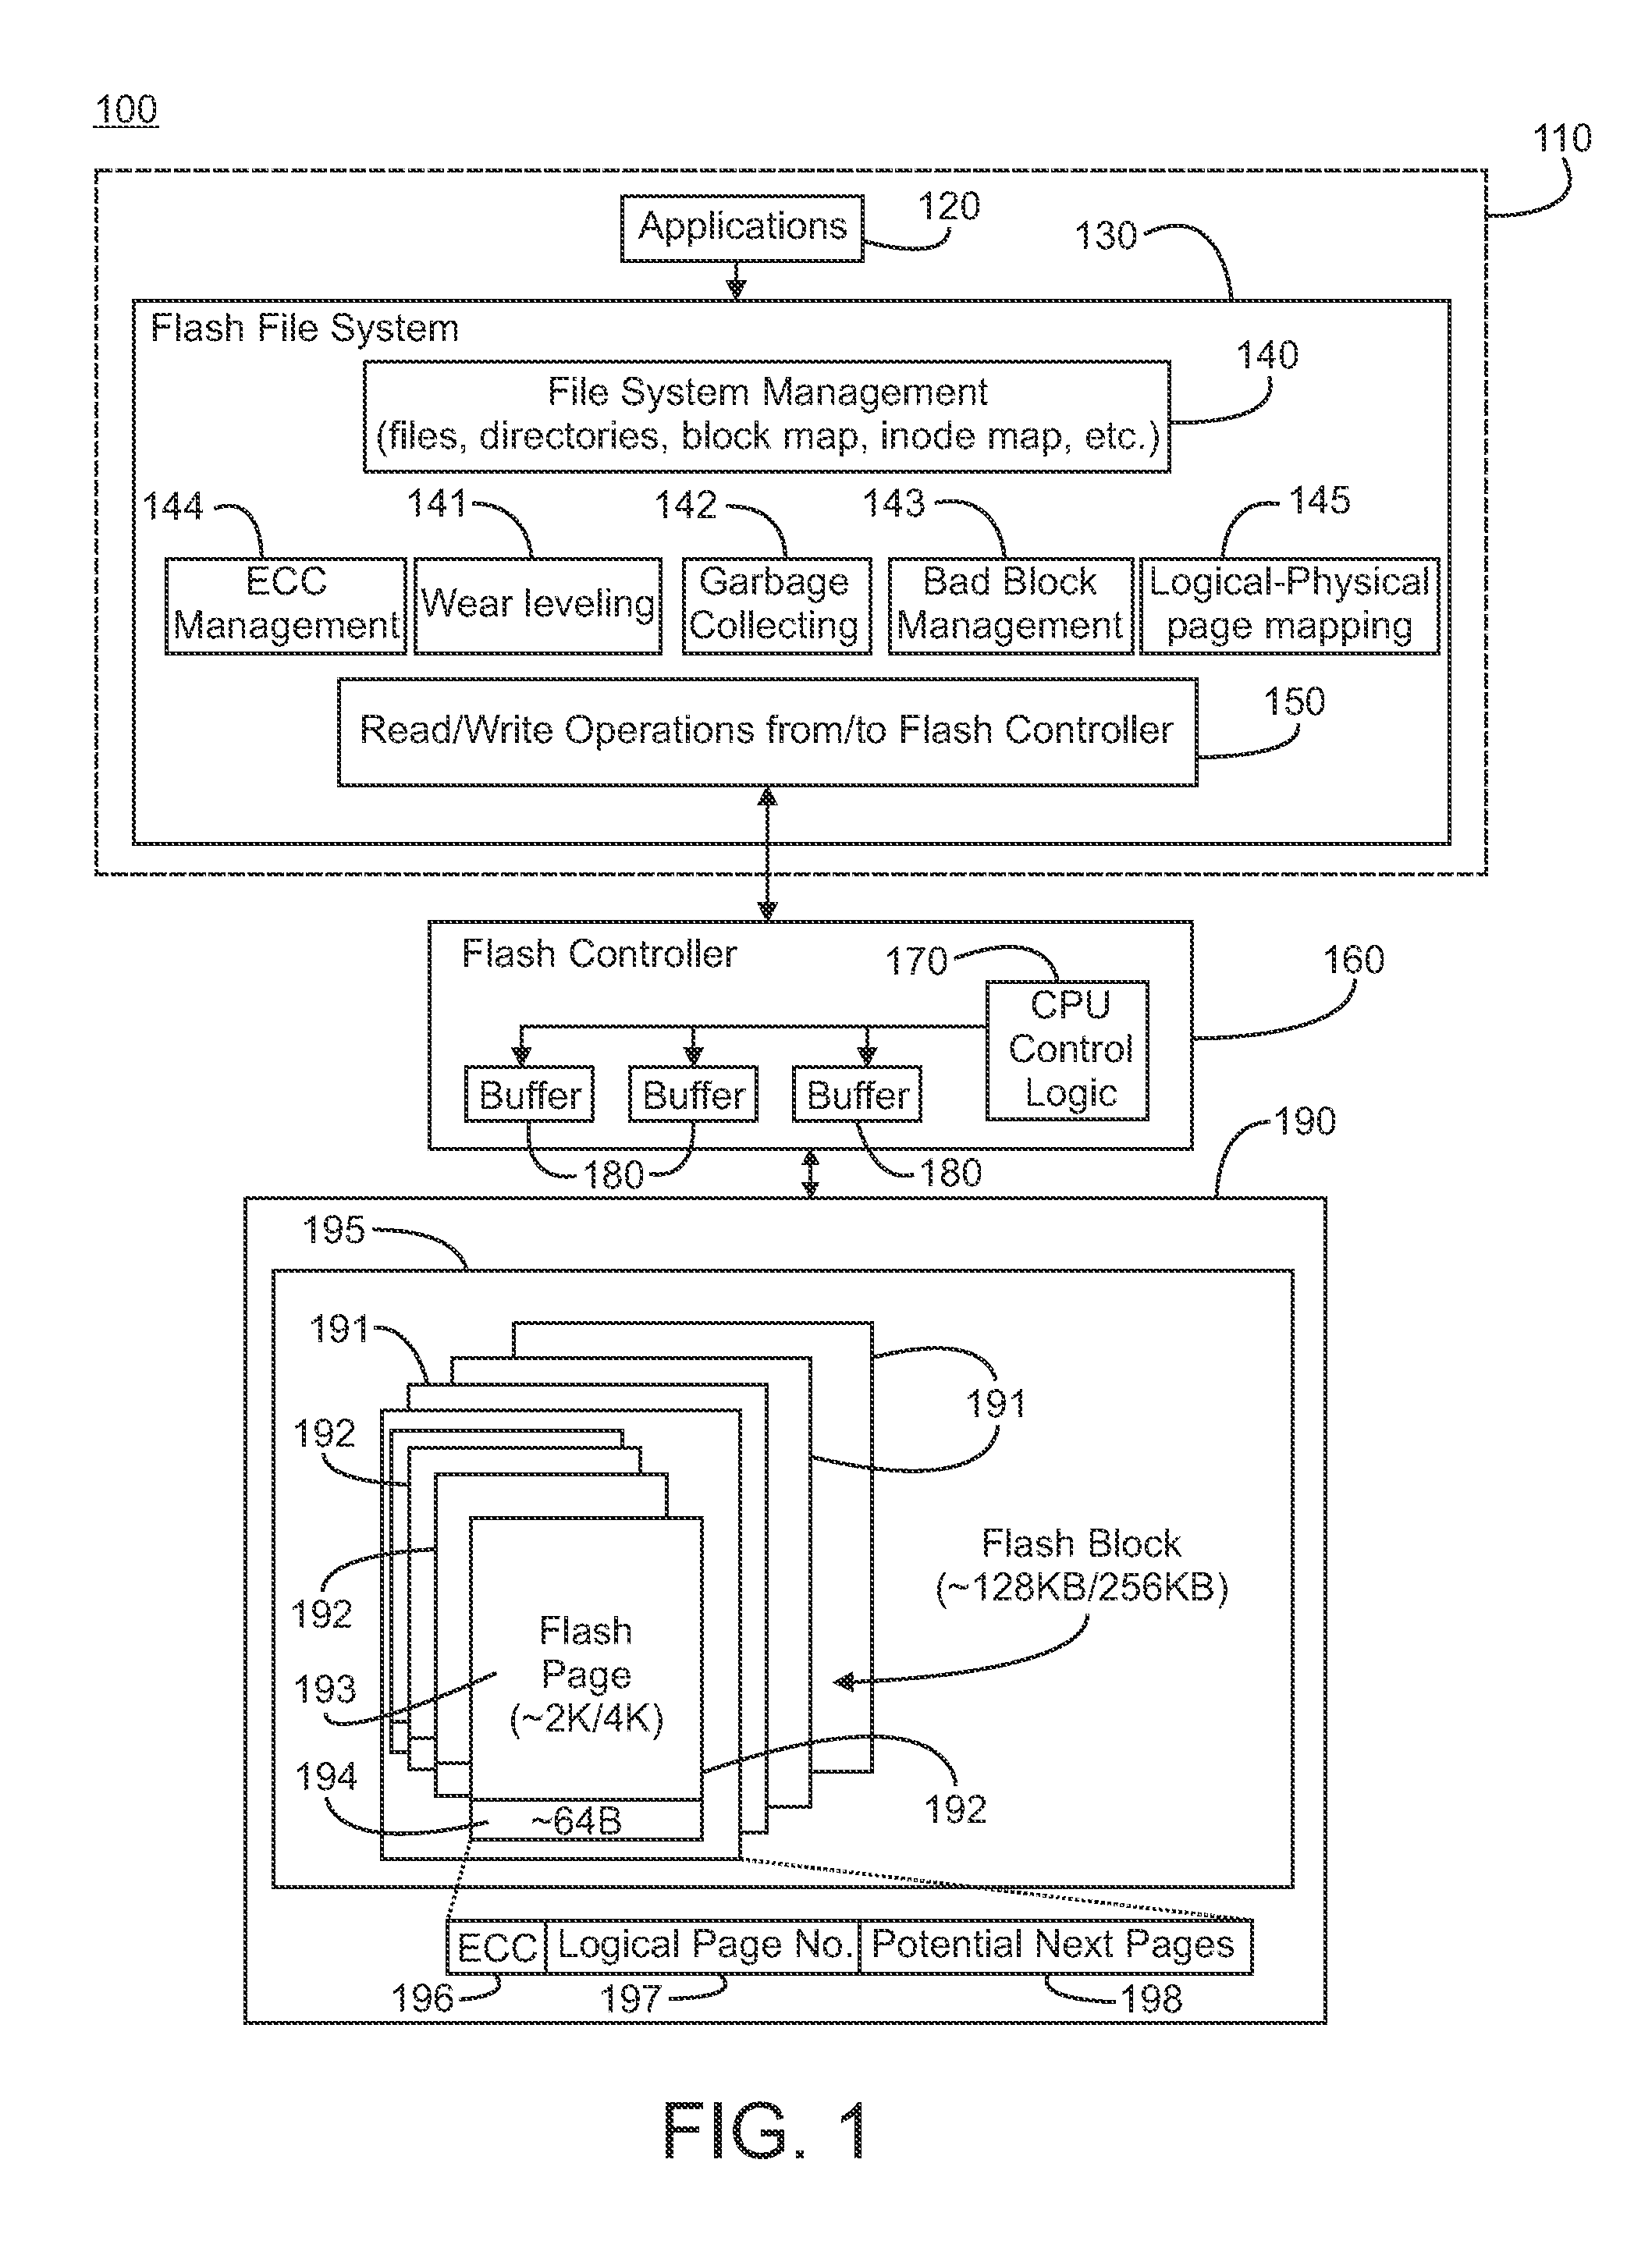 Storing Multi-Stream Non-Linear Access Patterns in a Flash Based File-System